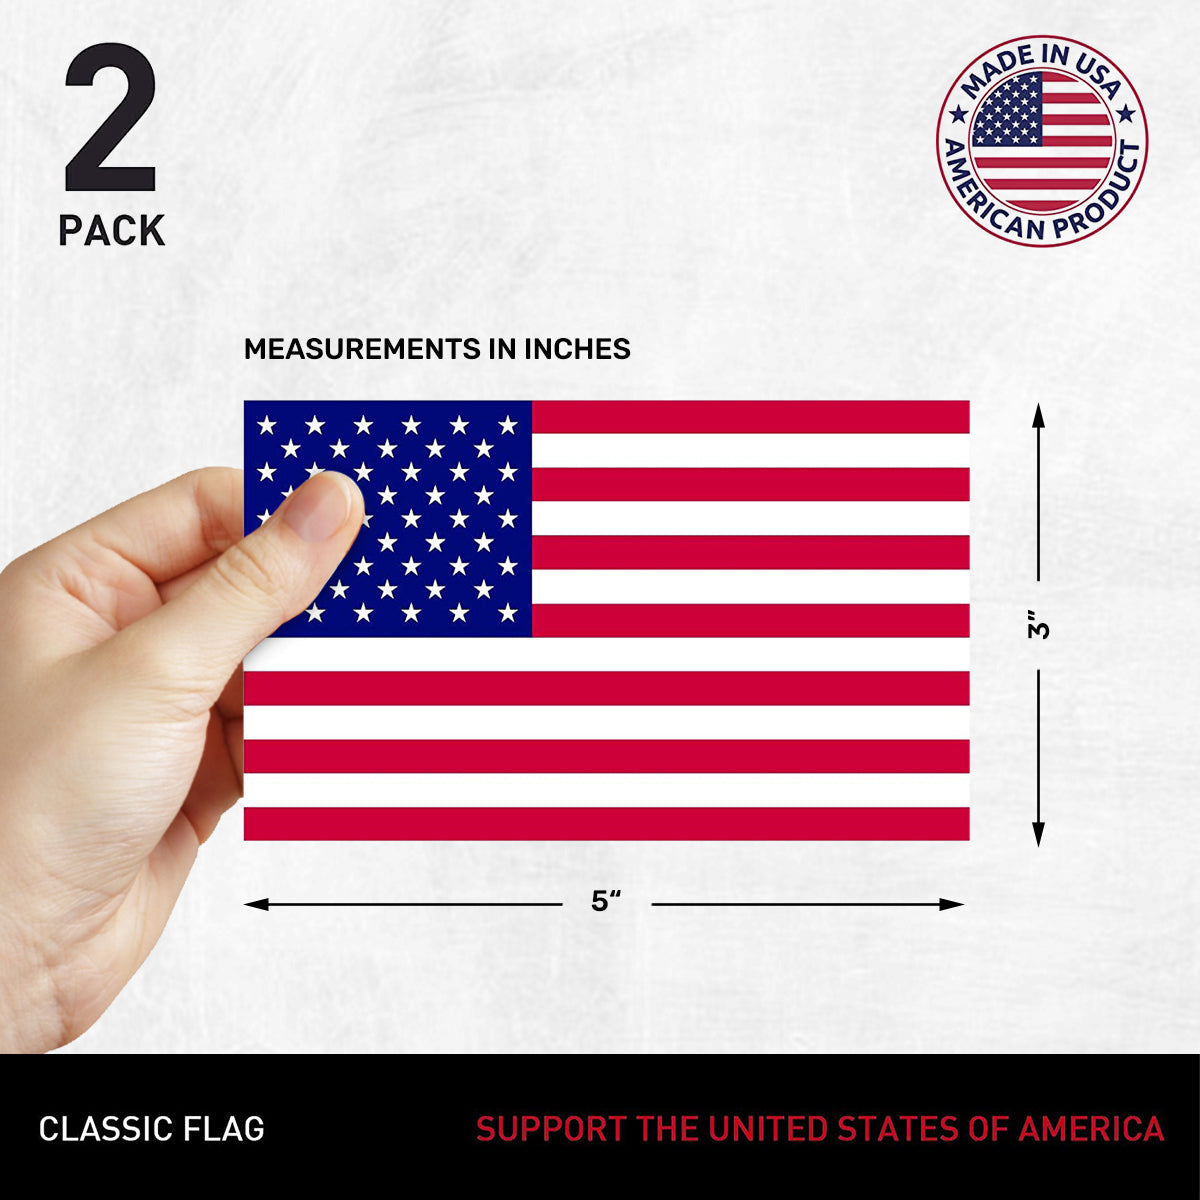 New General American Flag Premium Vynl Decals - Classic American Flag - 2-Pack